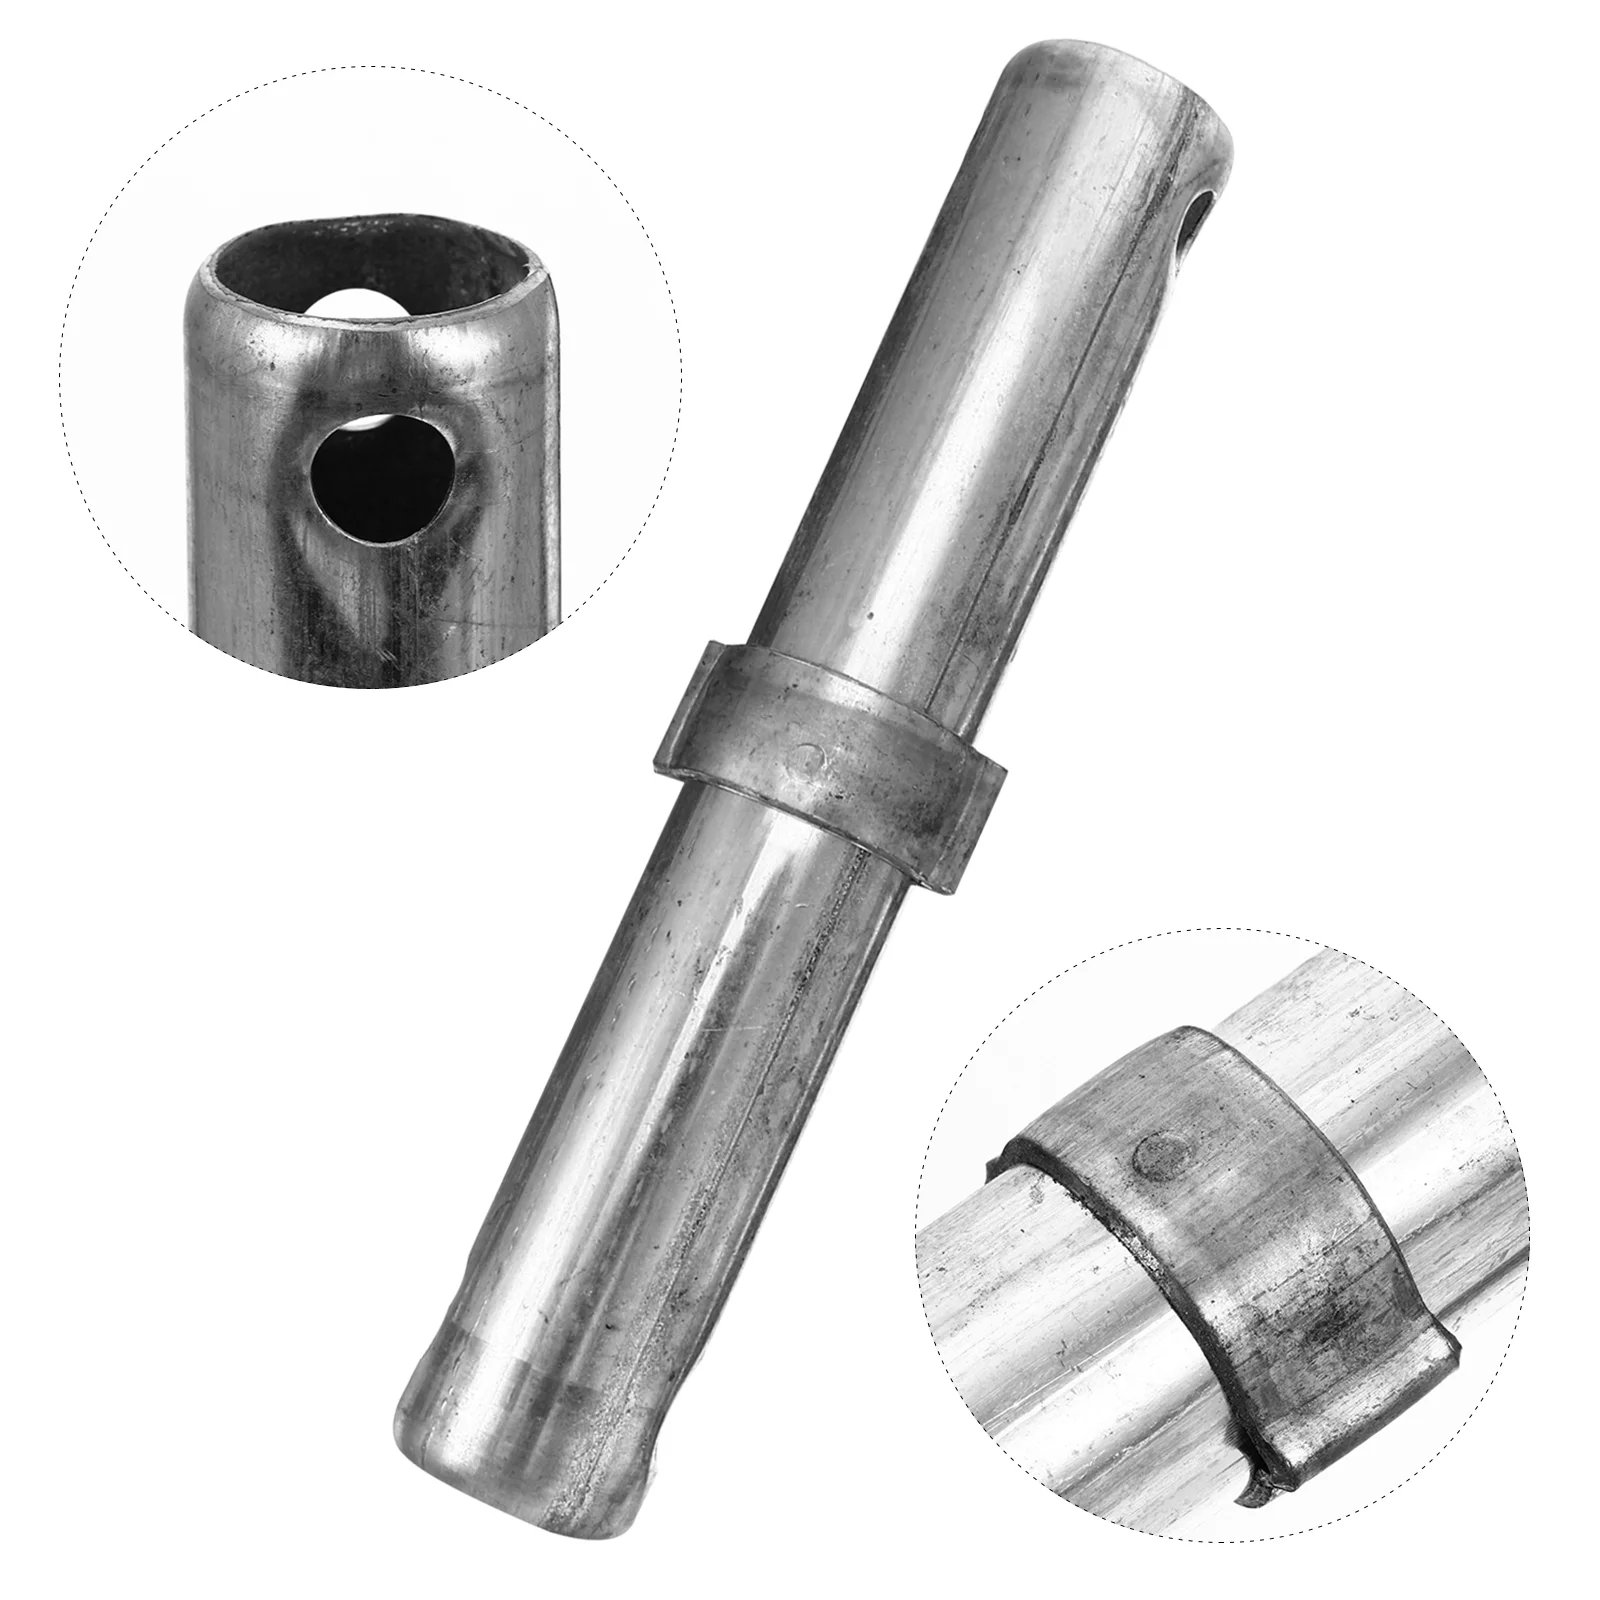 

Scaffolding Scaffold Pin Pins Coupling Locking Accessories Supplies Pigtail Equipment Replacement Retainers Spring Connector Peg